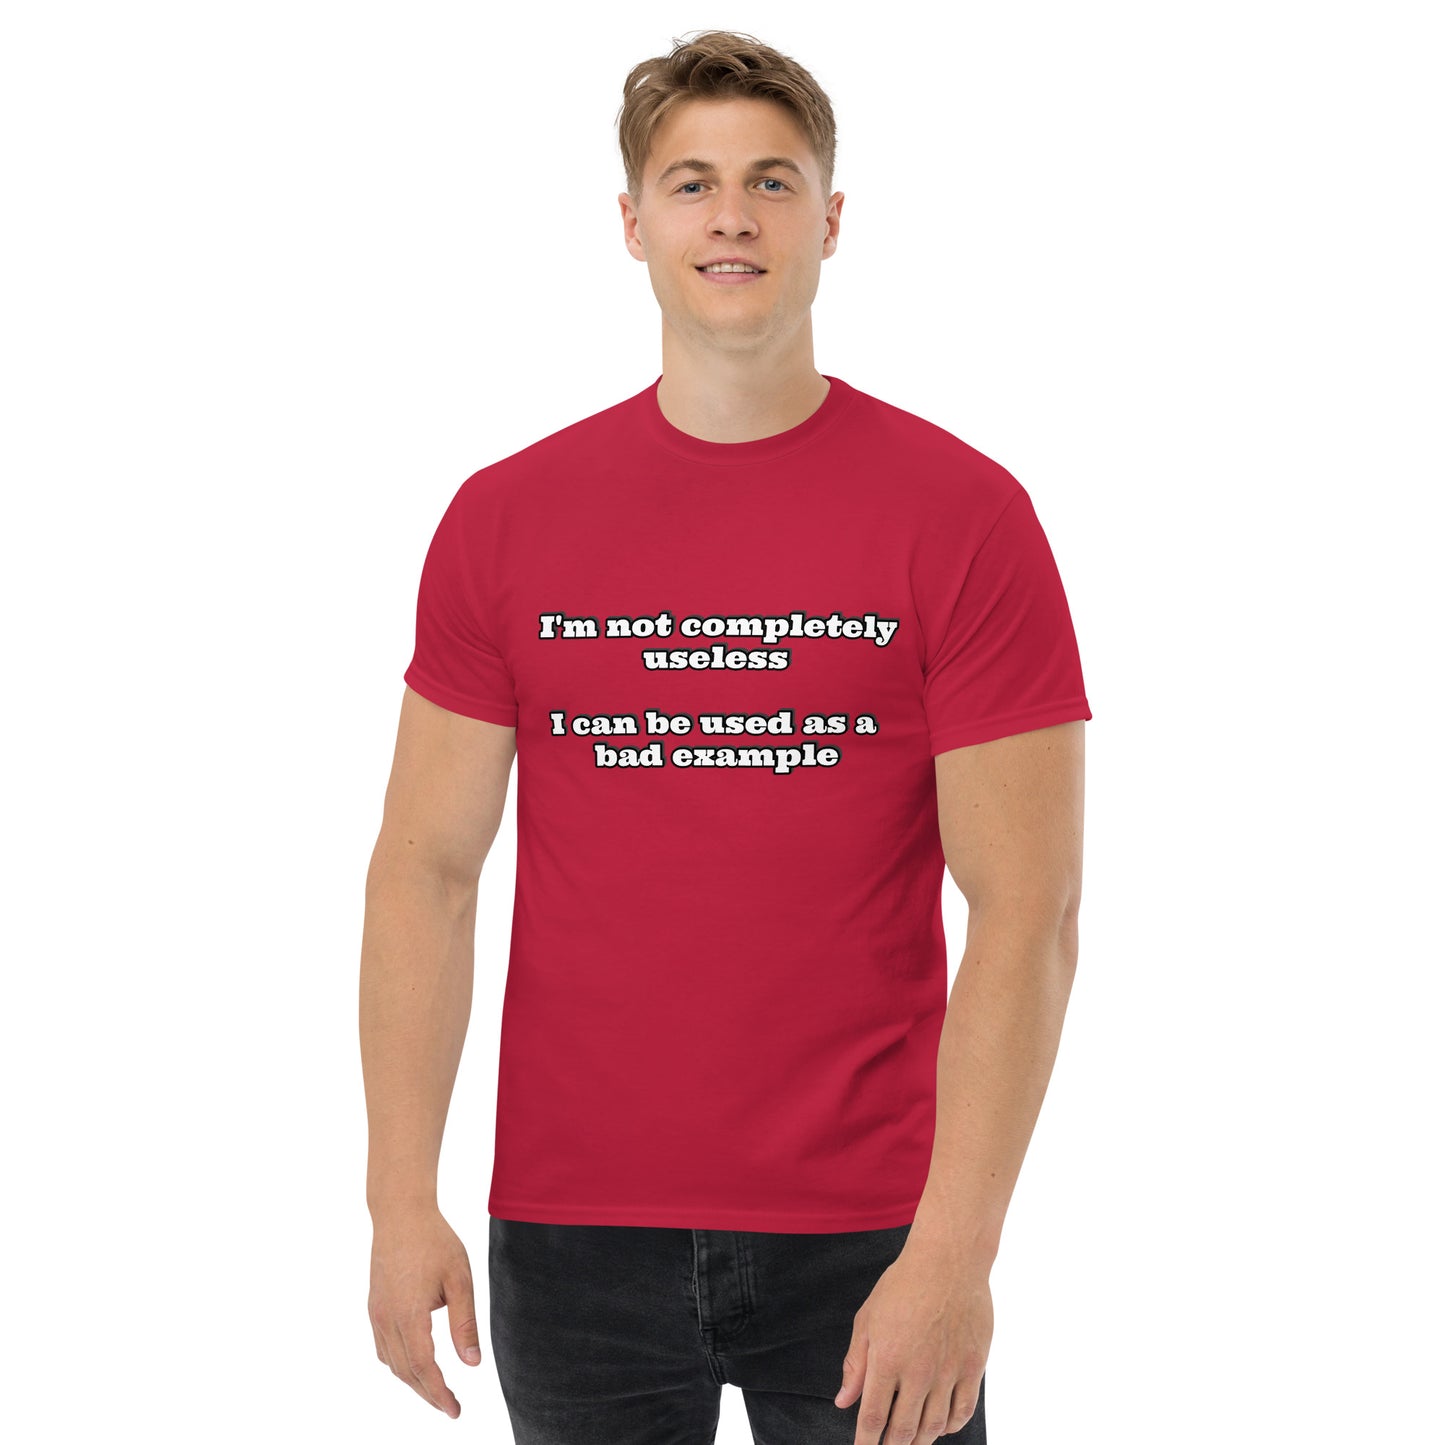 Men with cardinal red t-shirt with text “I'm not completely useless I can be used as a bad example”